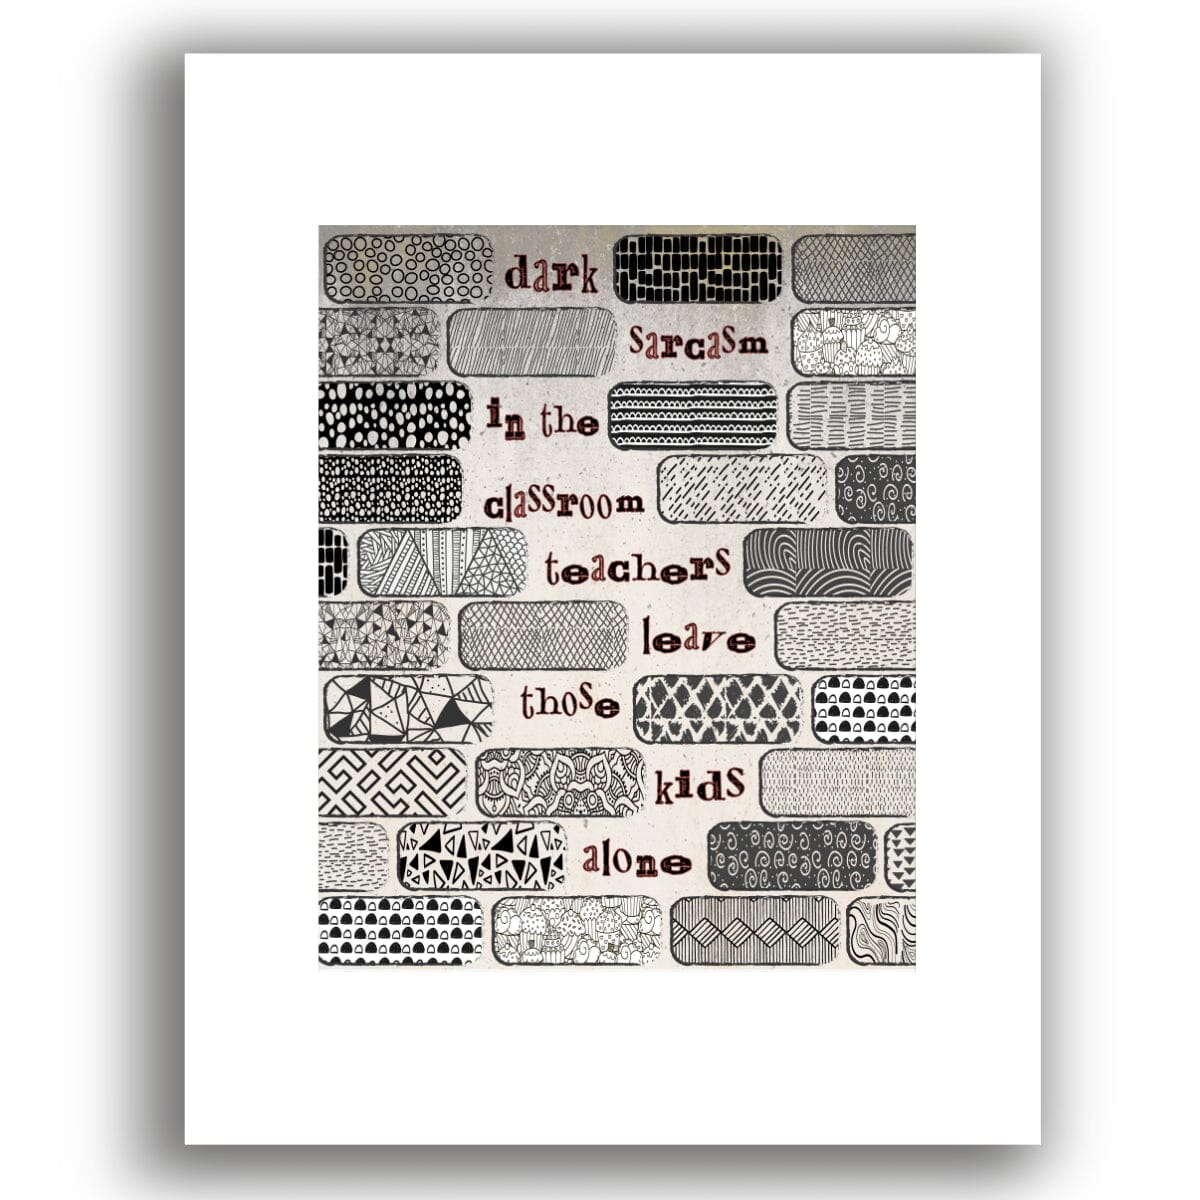 Another Brick in the Wall by Pink Floyd - Song Lyric Poster Song Lyrics Art Song Lyrics Art 8x10 White Matted Unframed Print 